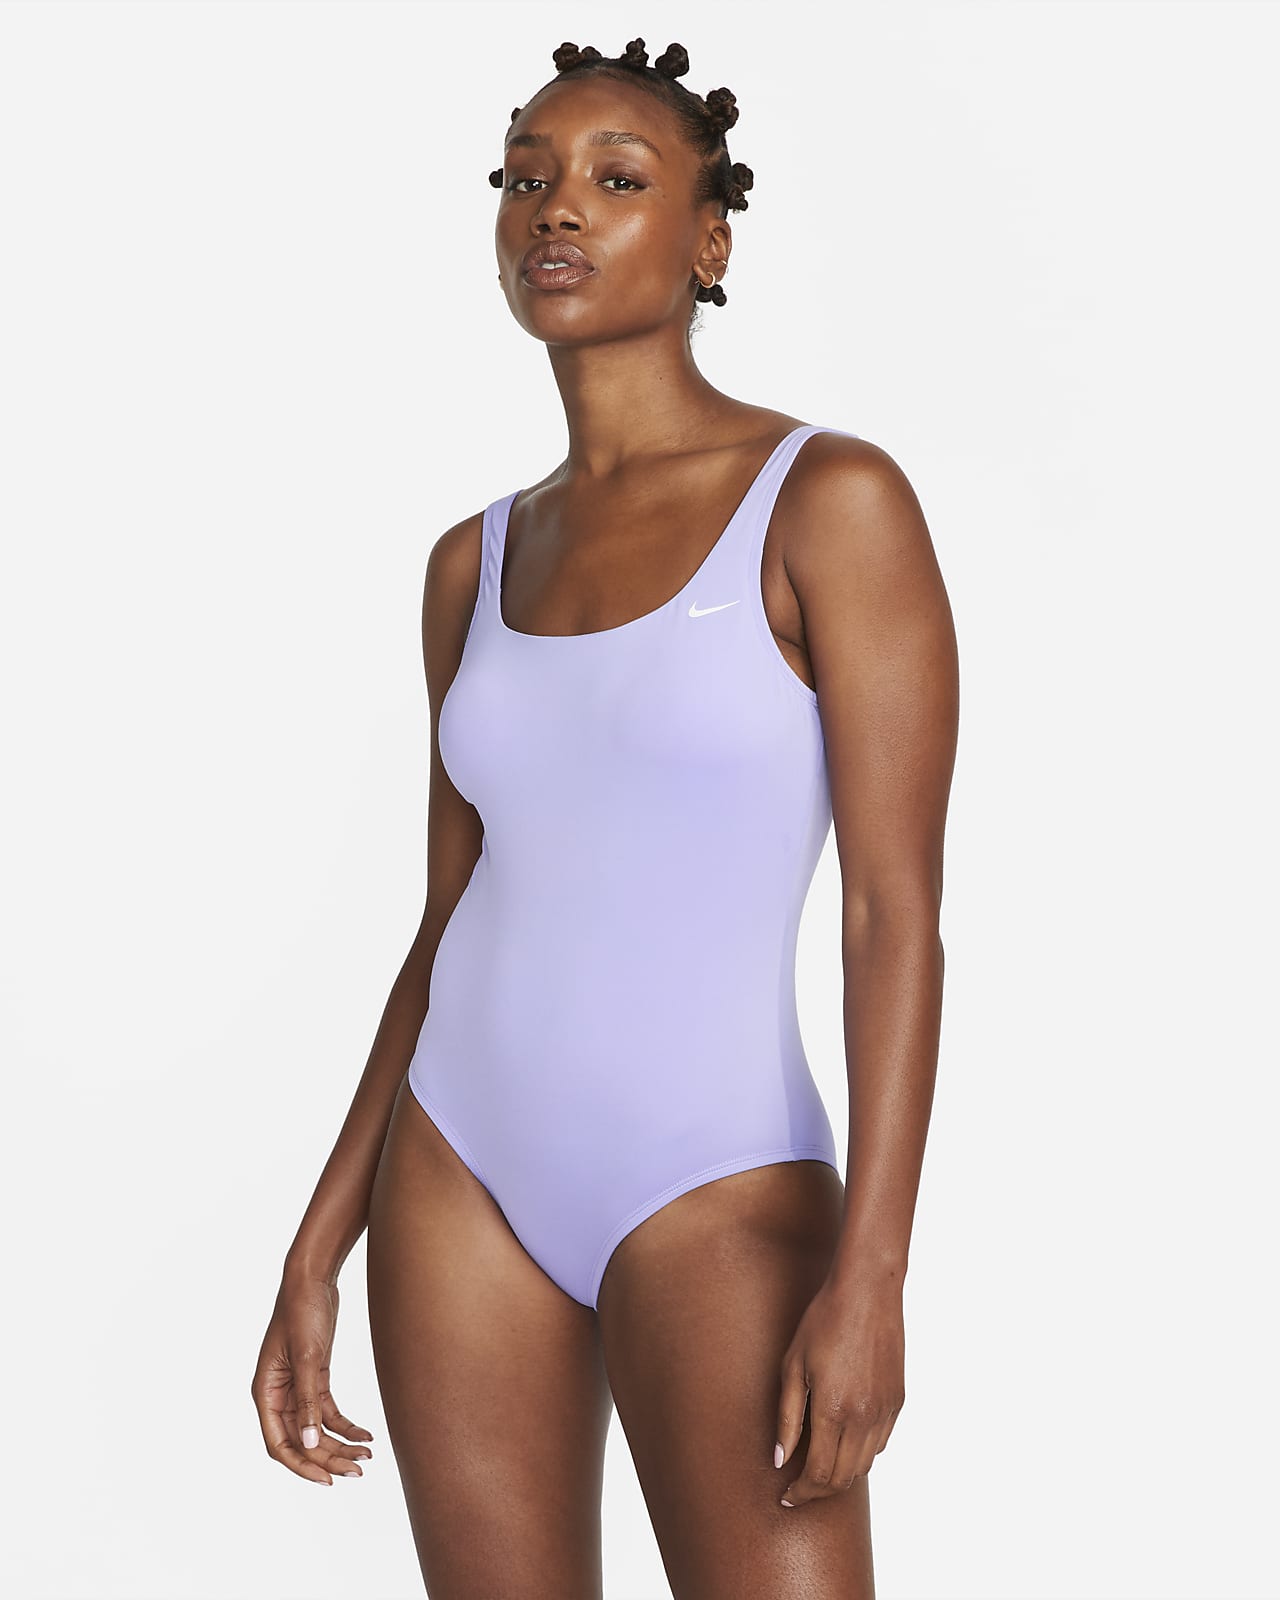 What are the benefits of wearing a loose or a tight swimwear (swim